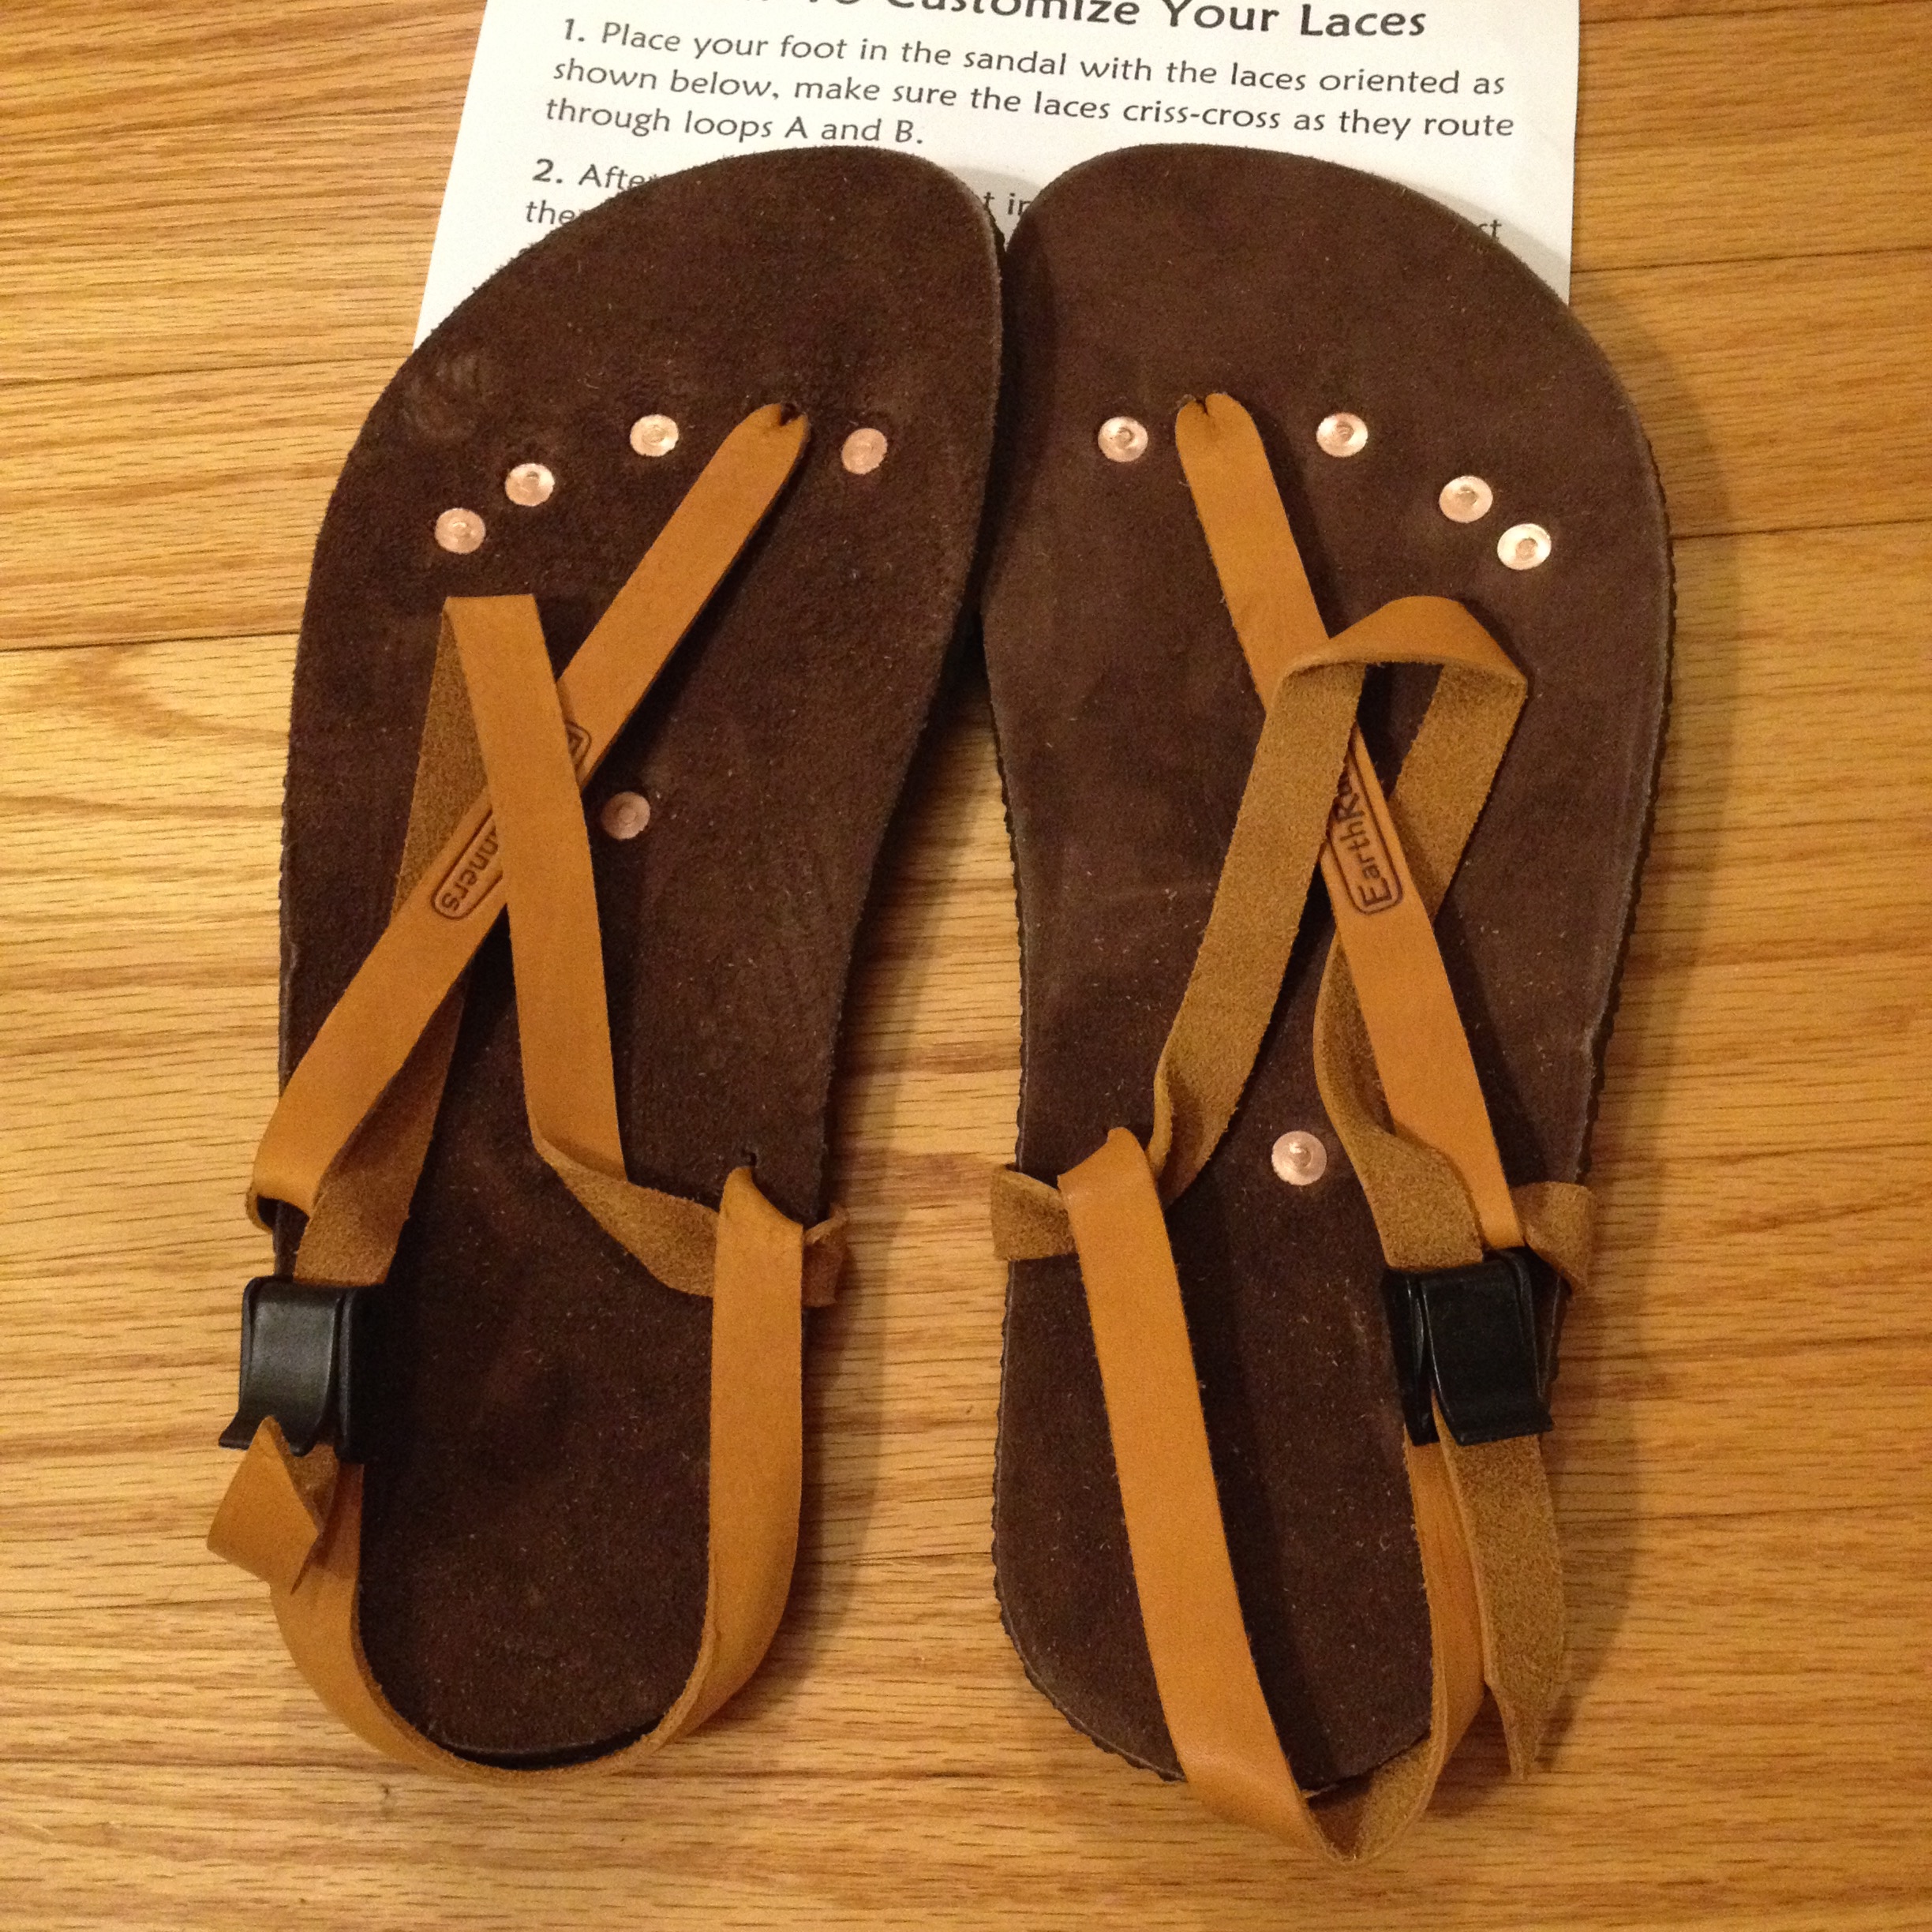 Earth Runners sandal review: A nearly 